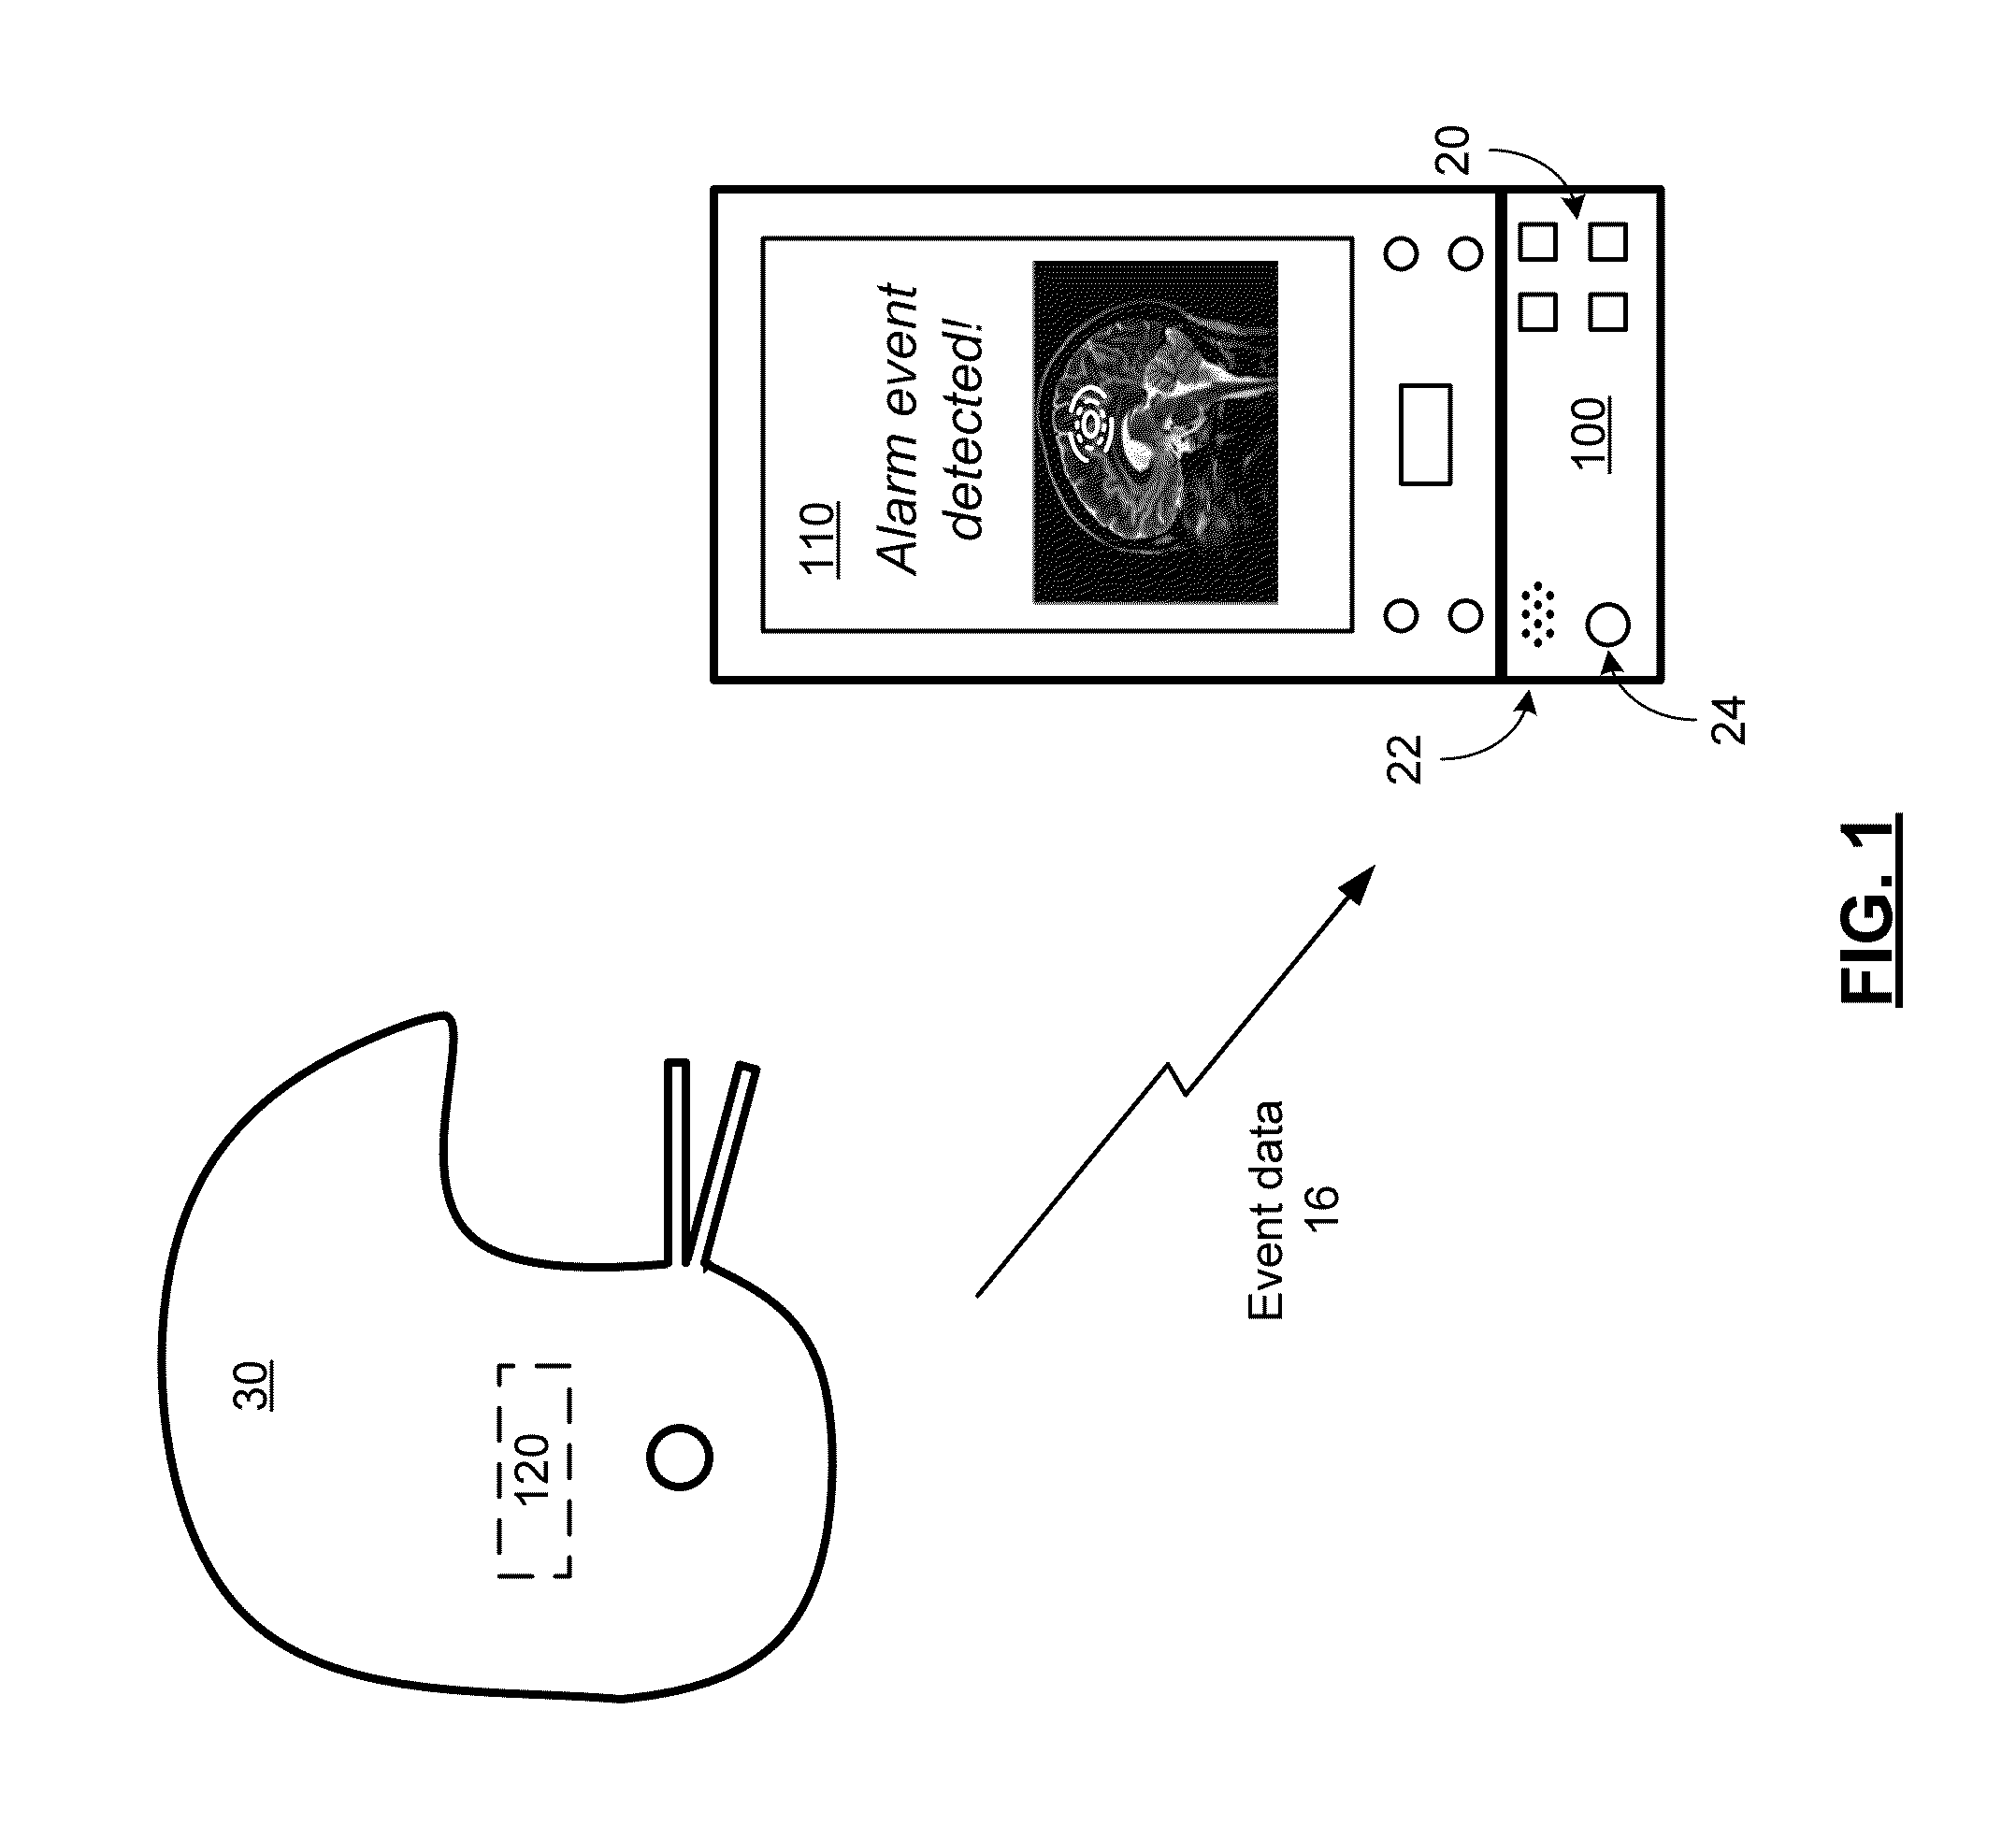 Method, system and device for monitoring protective headgear